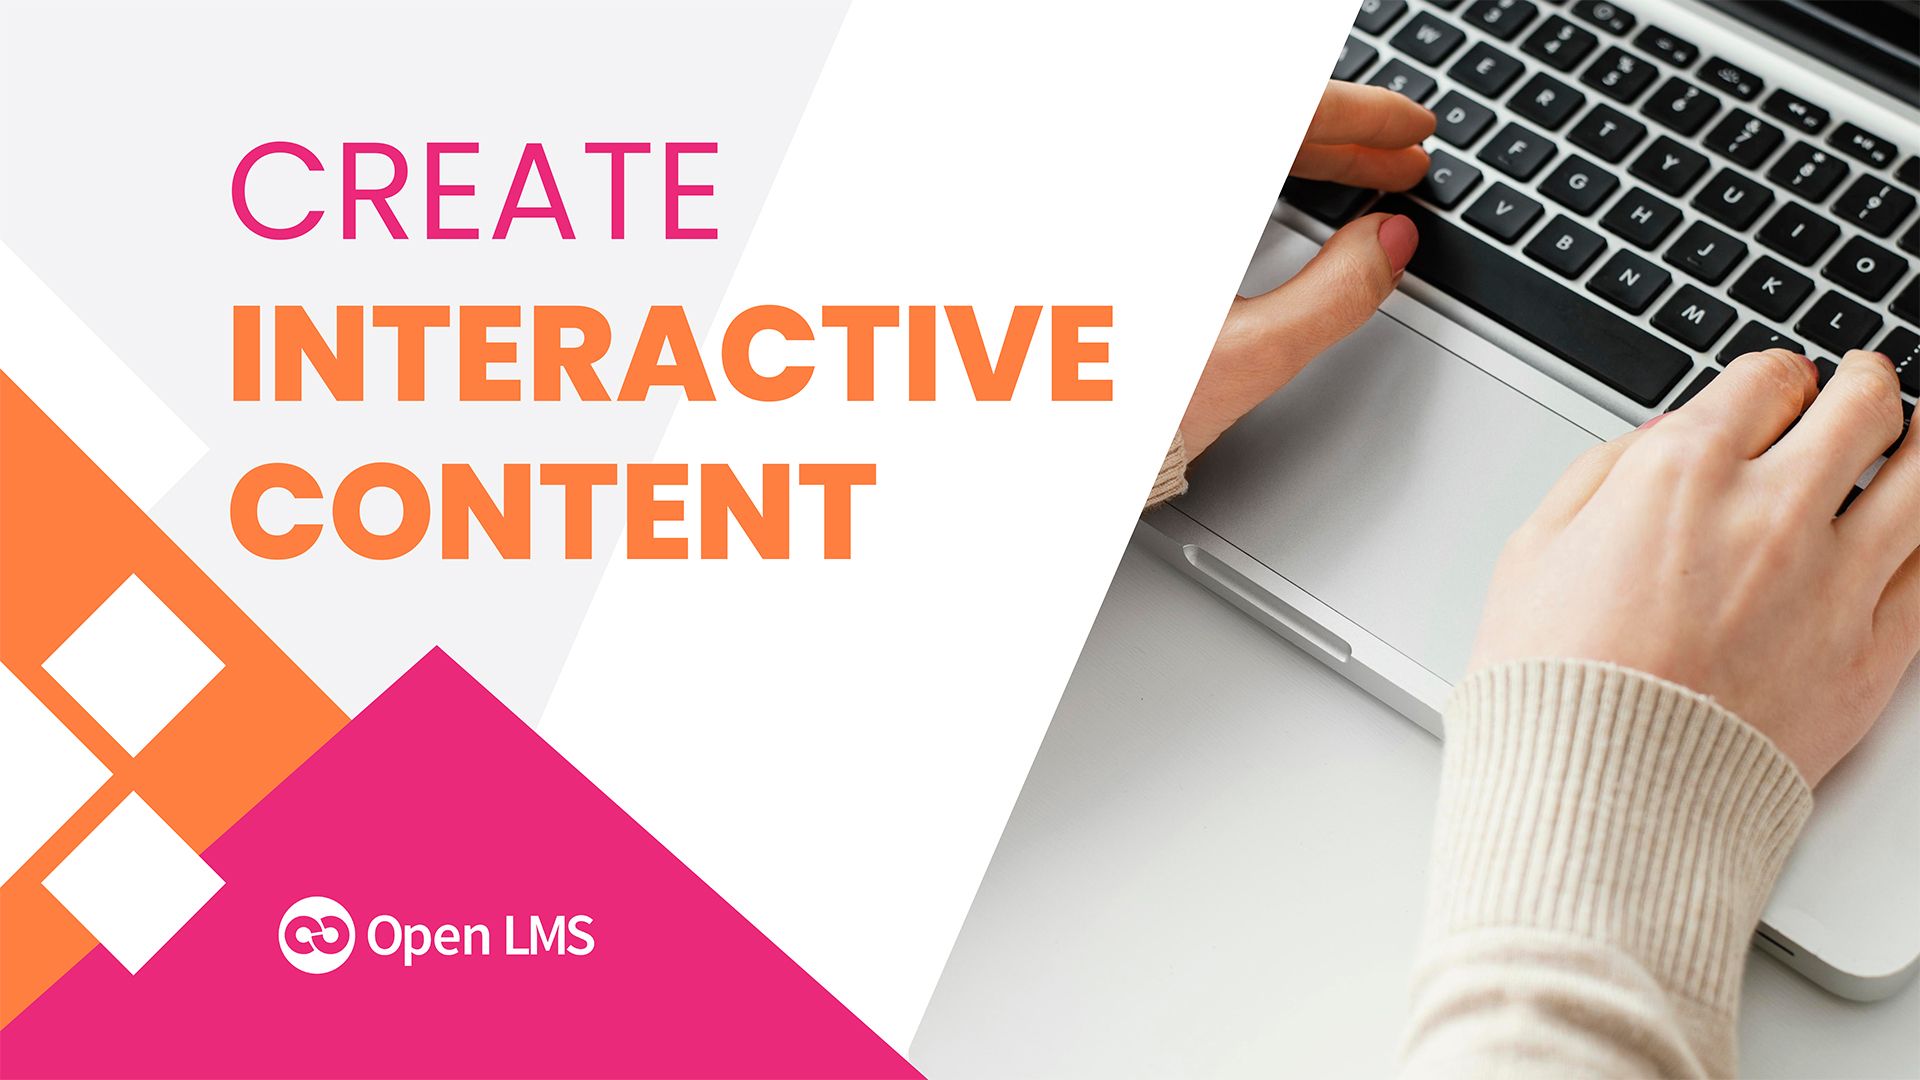 5 Tools You Can Use to Create Interactive Content In Your LMS